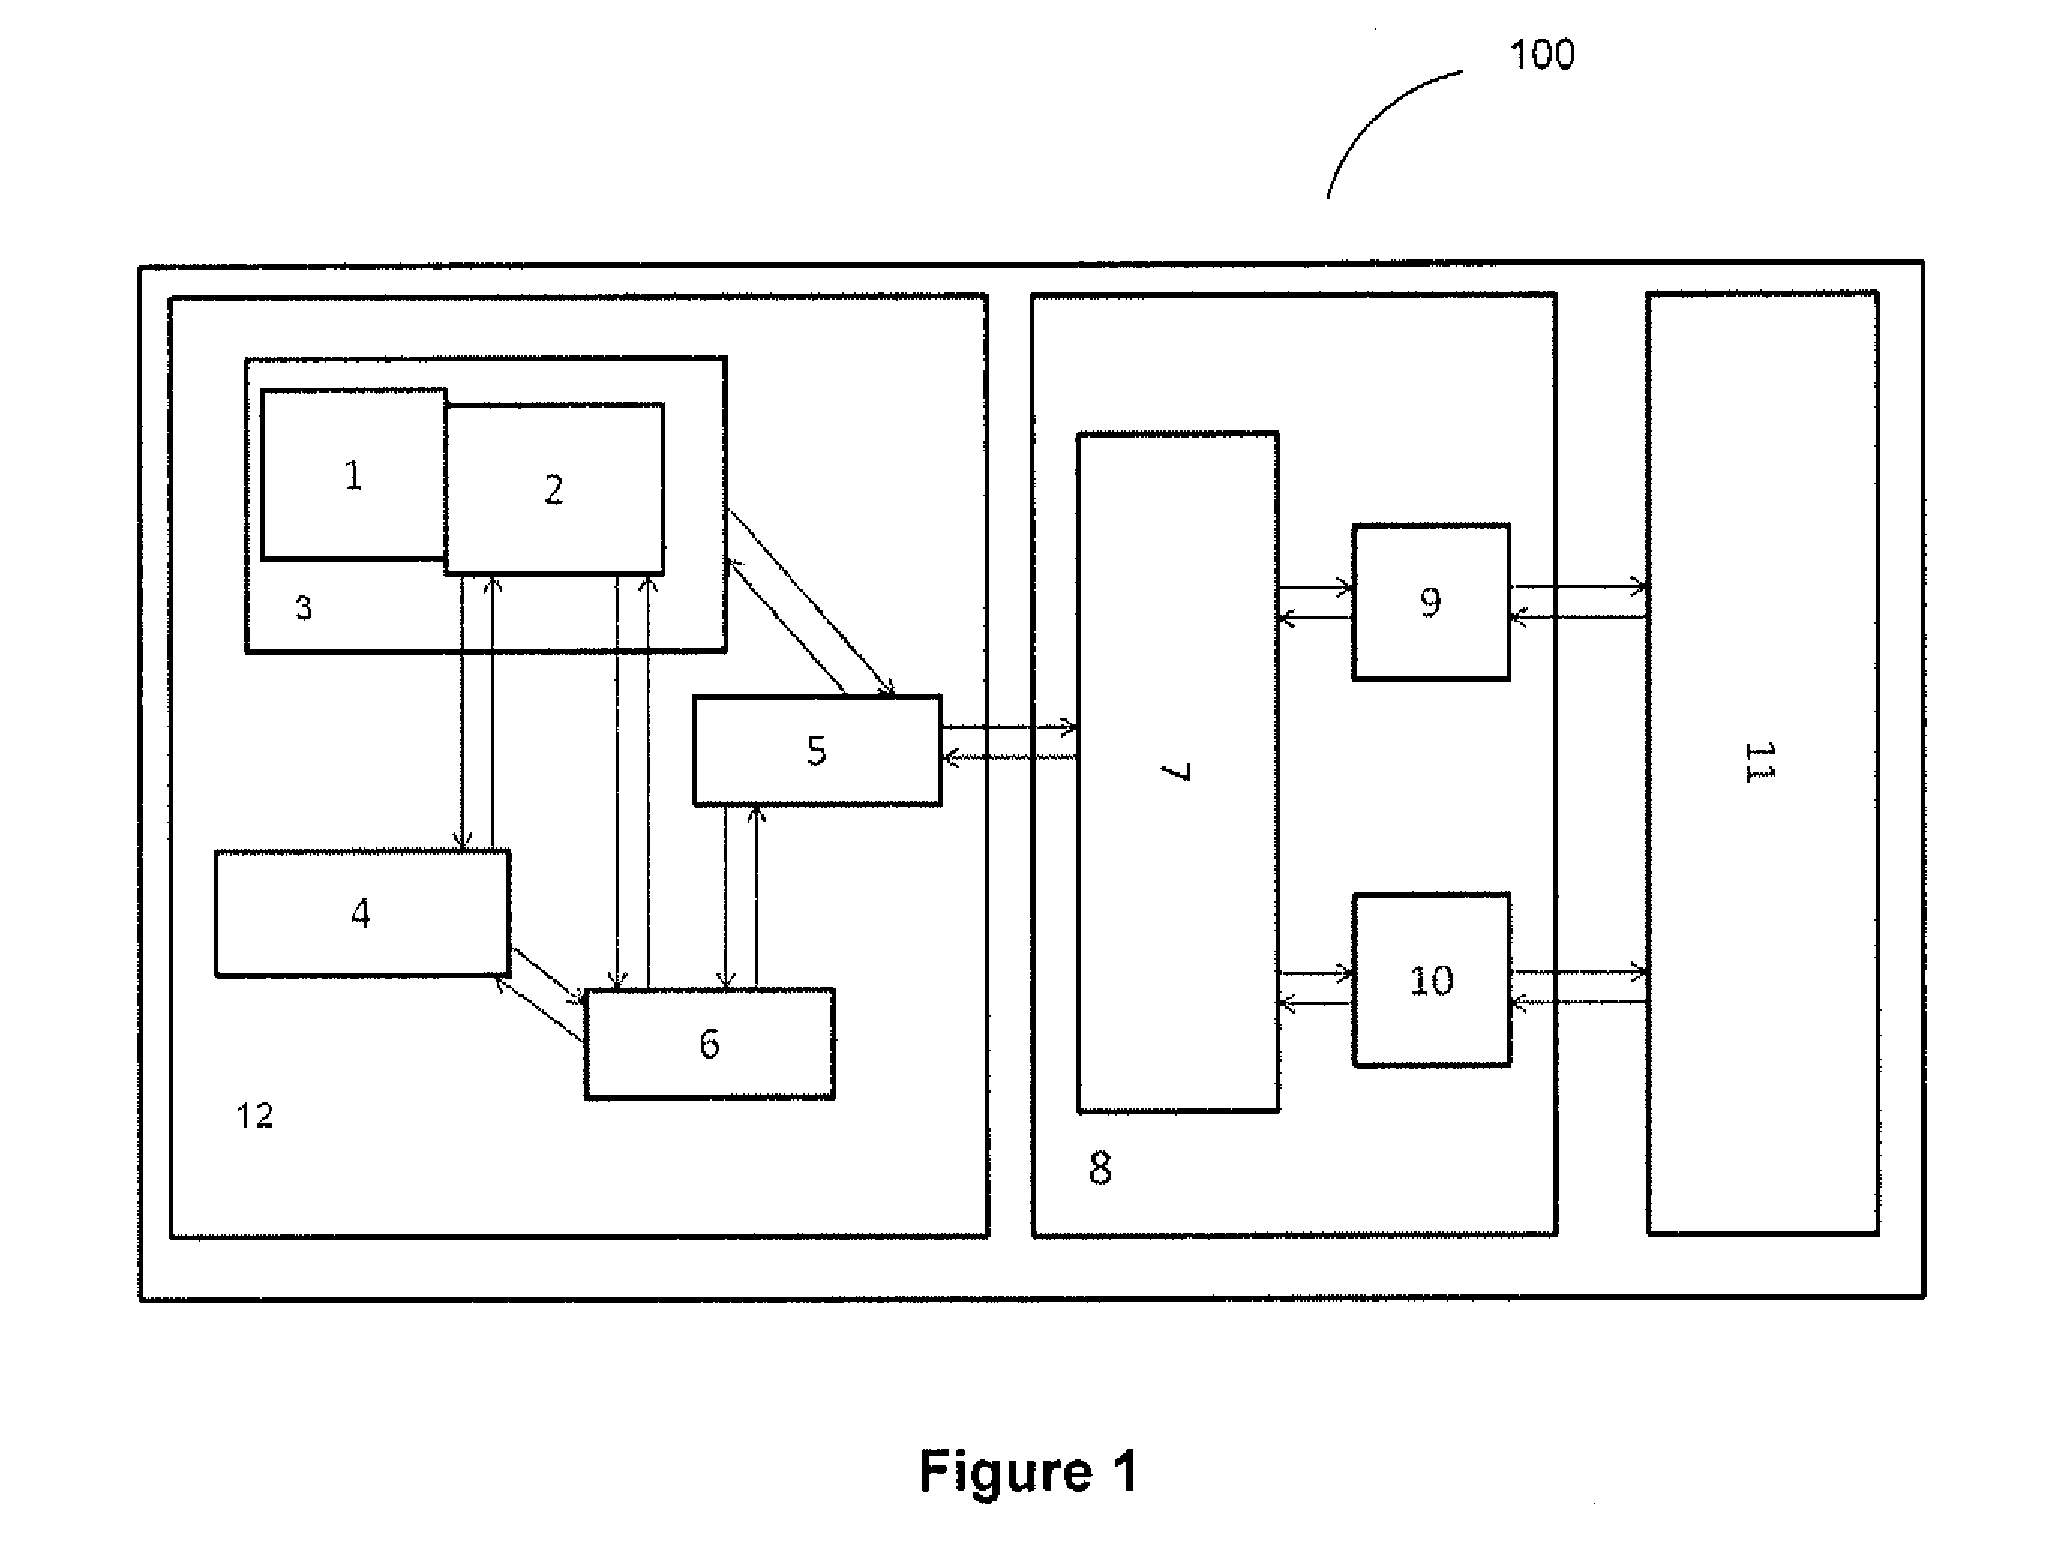 System and Method for Sharing Data Between Occasionally Connected Devices and Remote Global Database